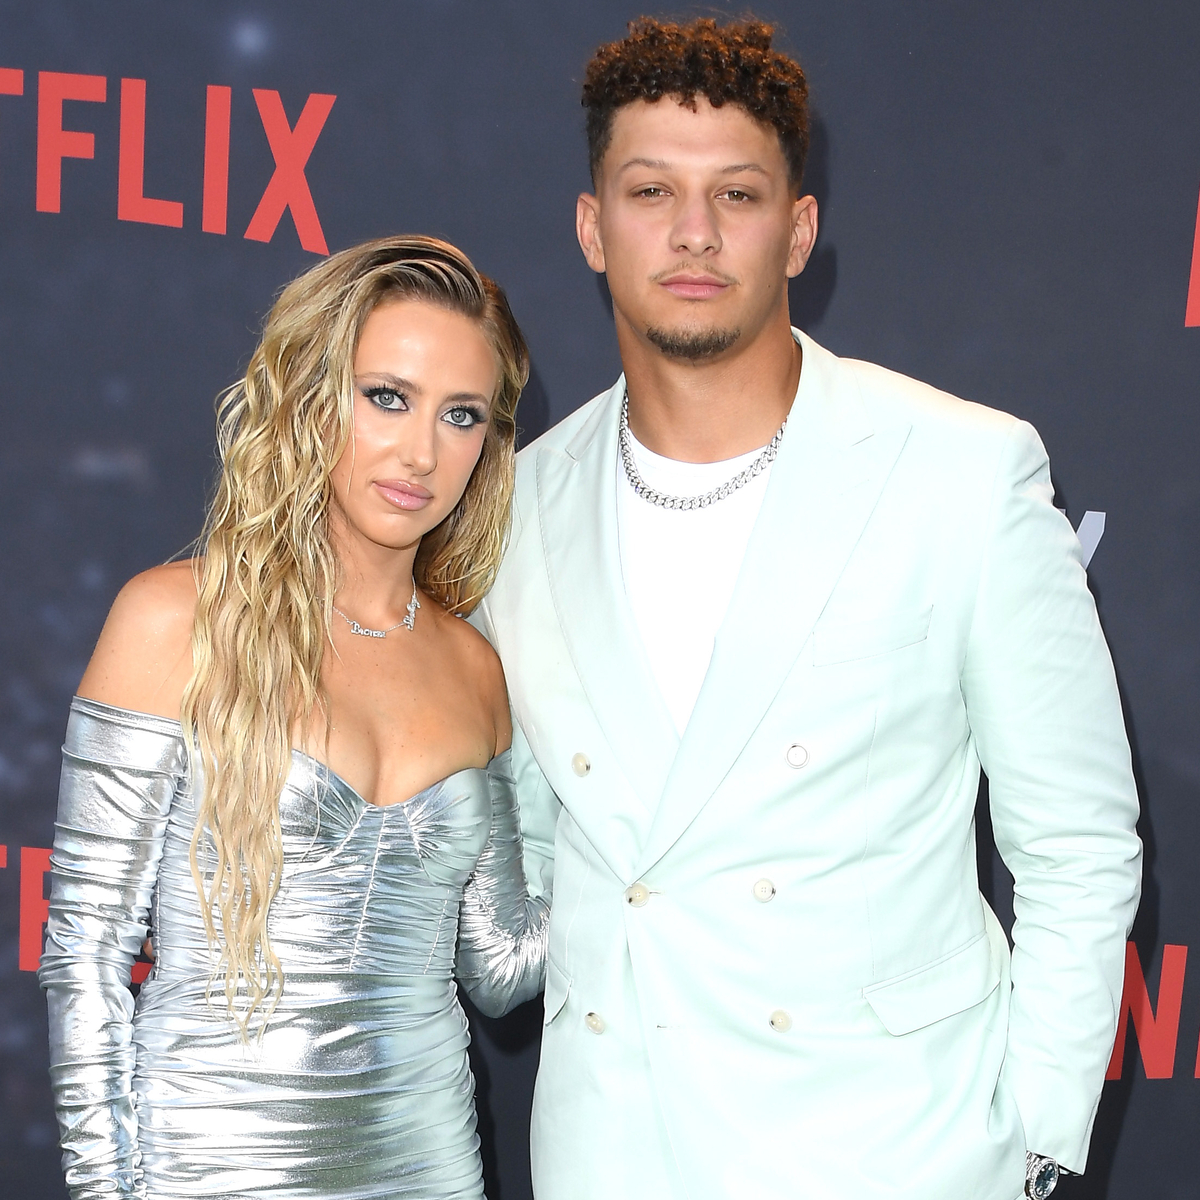 Patrick Mahomes' Wife Brittany Mahomes Fractures Her Back Amid Pelvic Floor Concerns